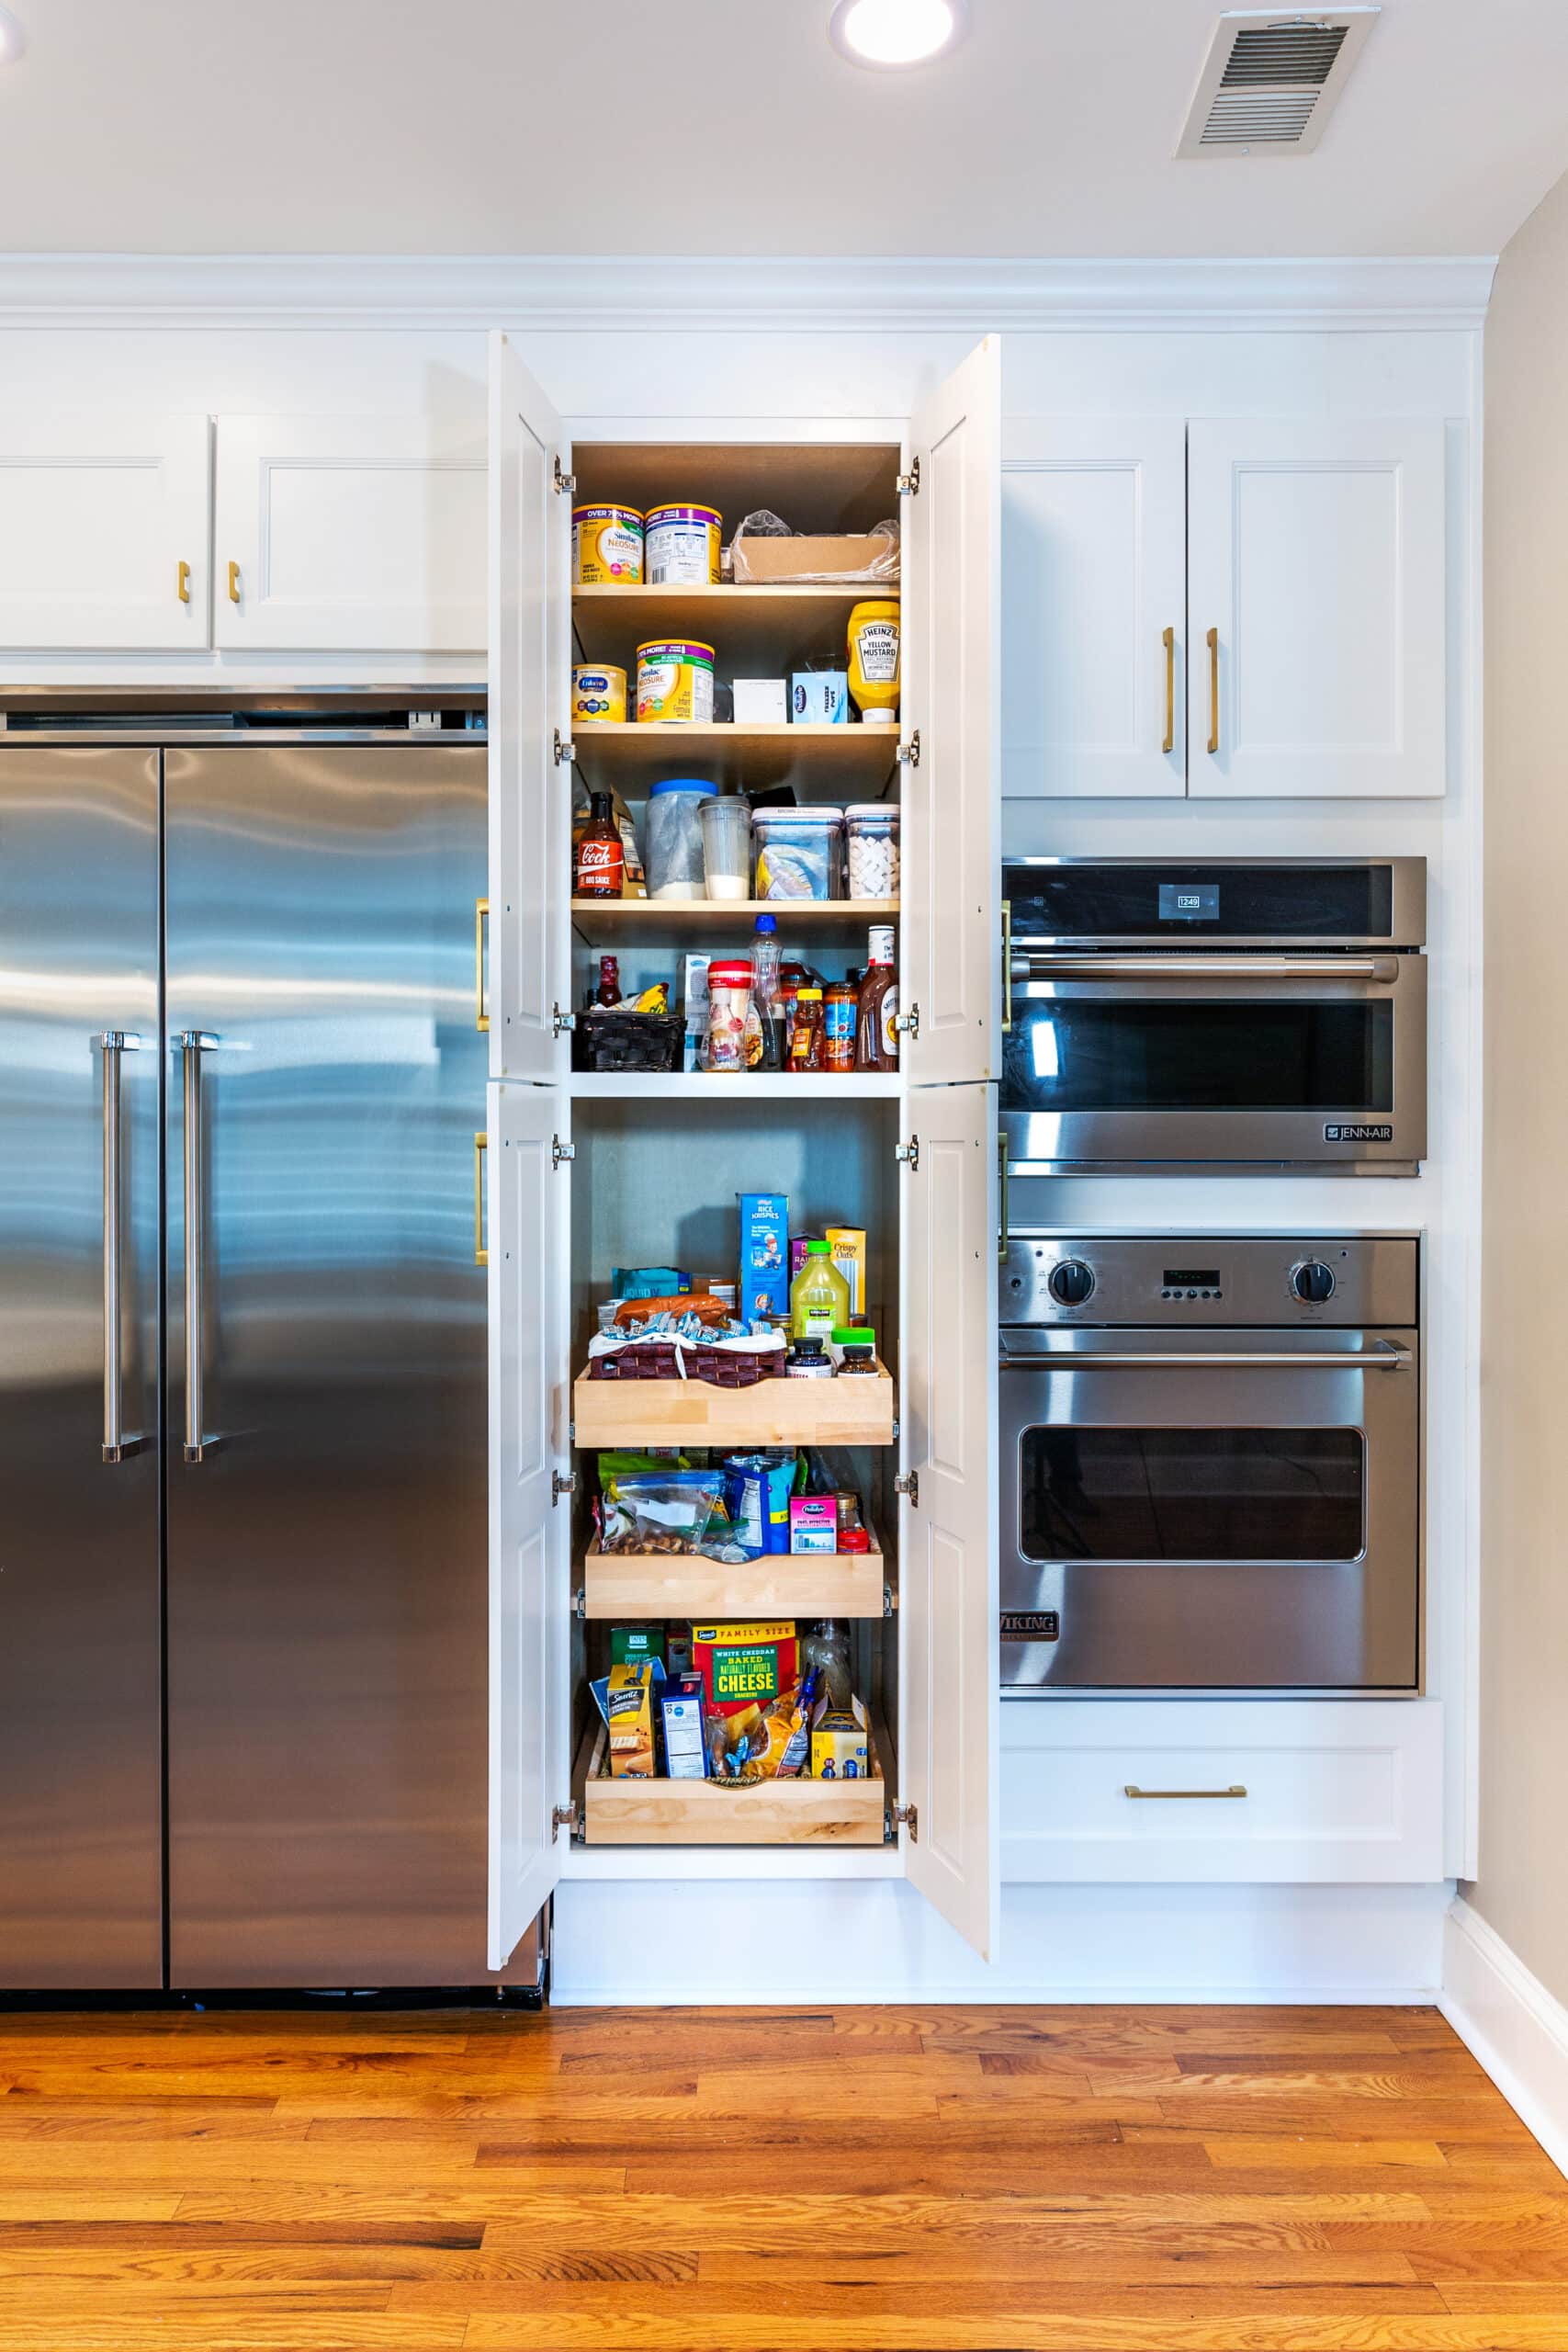 A well-stocked kitchen with a fridge and pantry